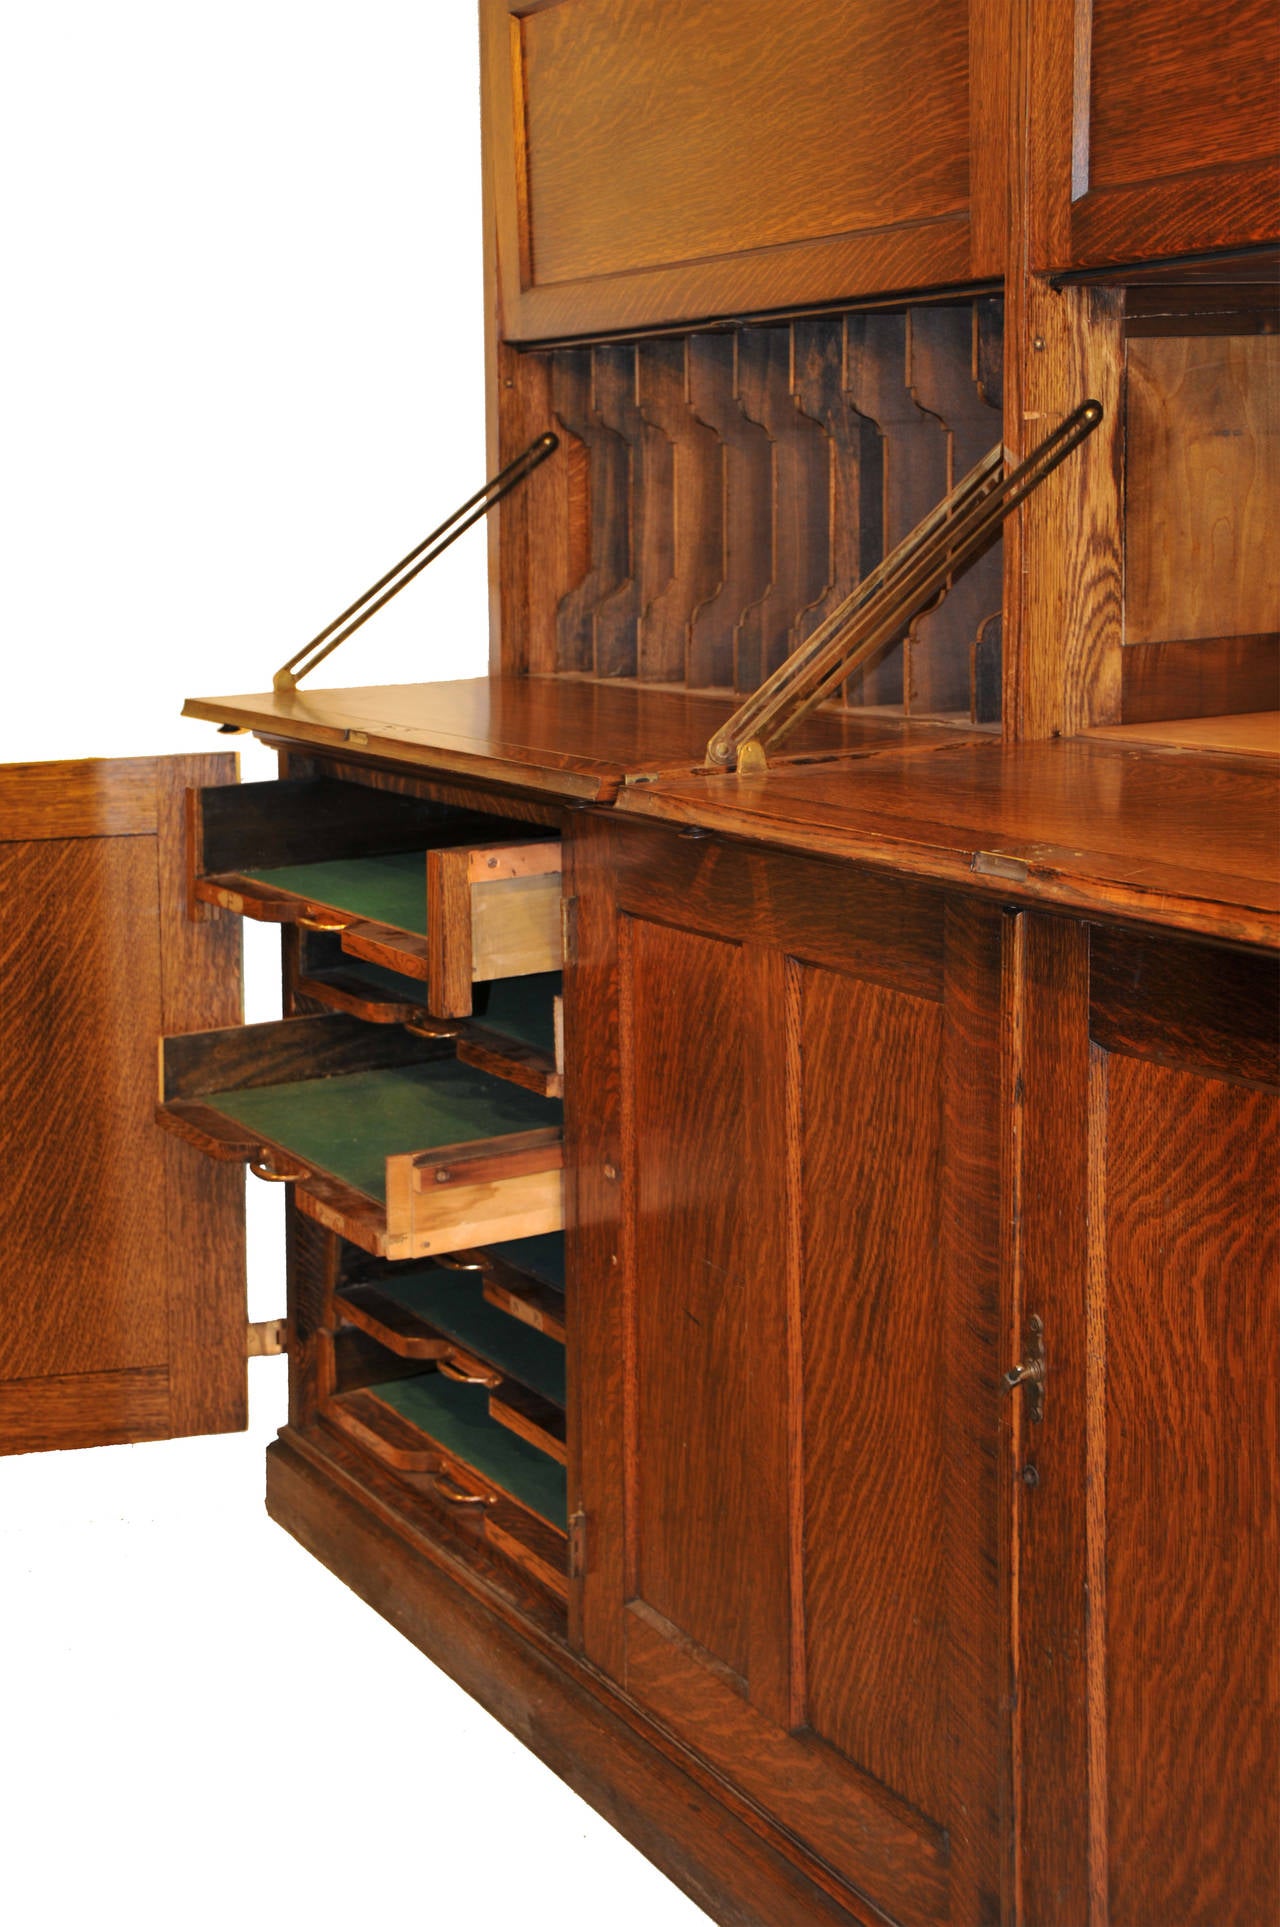 With fitted interior wish shelves, drawers and files with pull out desk.